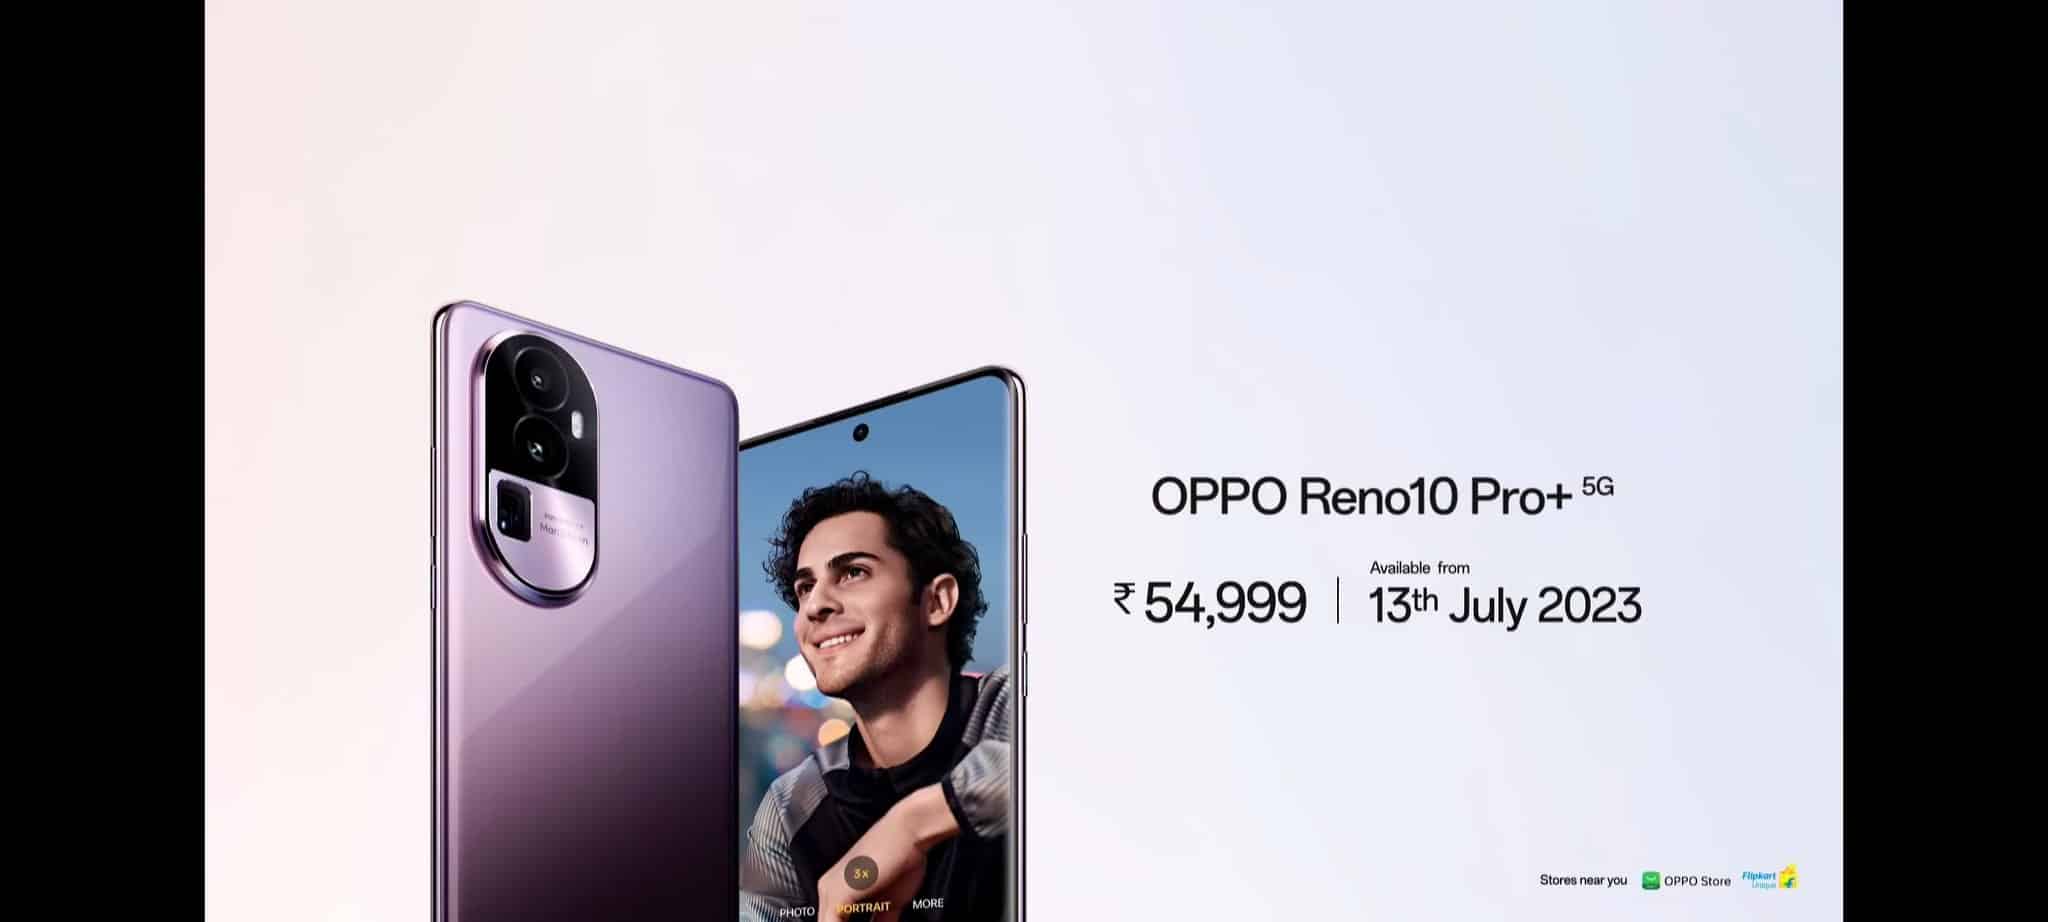 Oppo Reno 10 Pro+ - Price and Availability